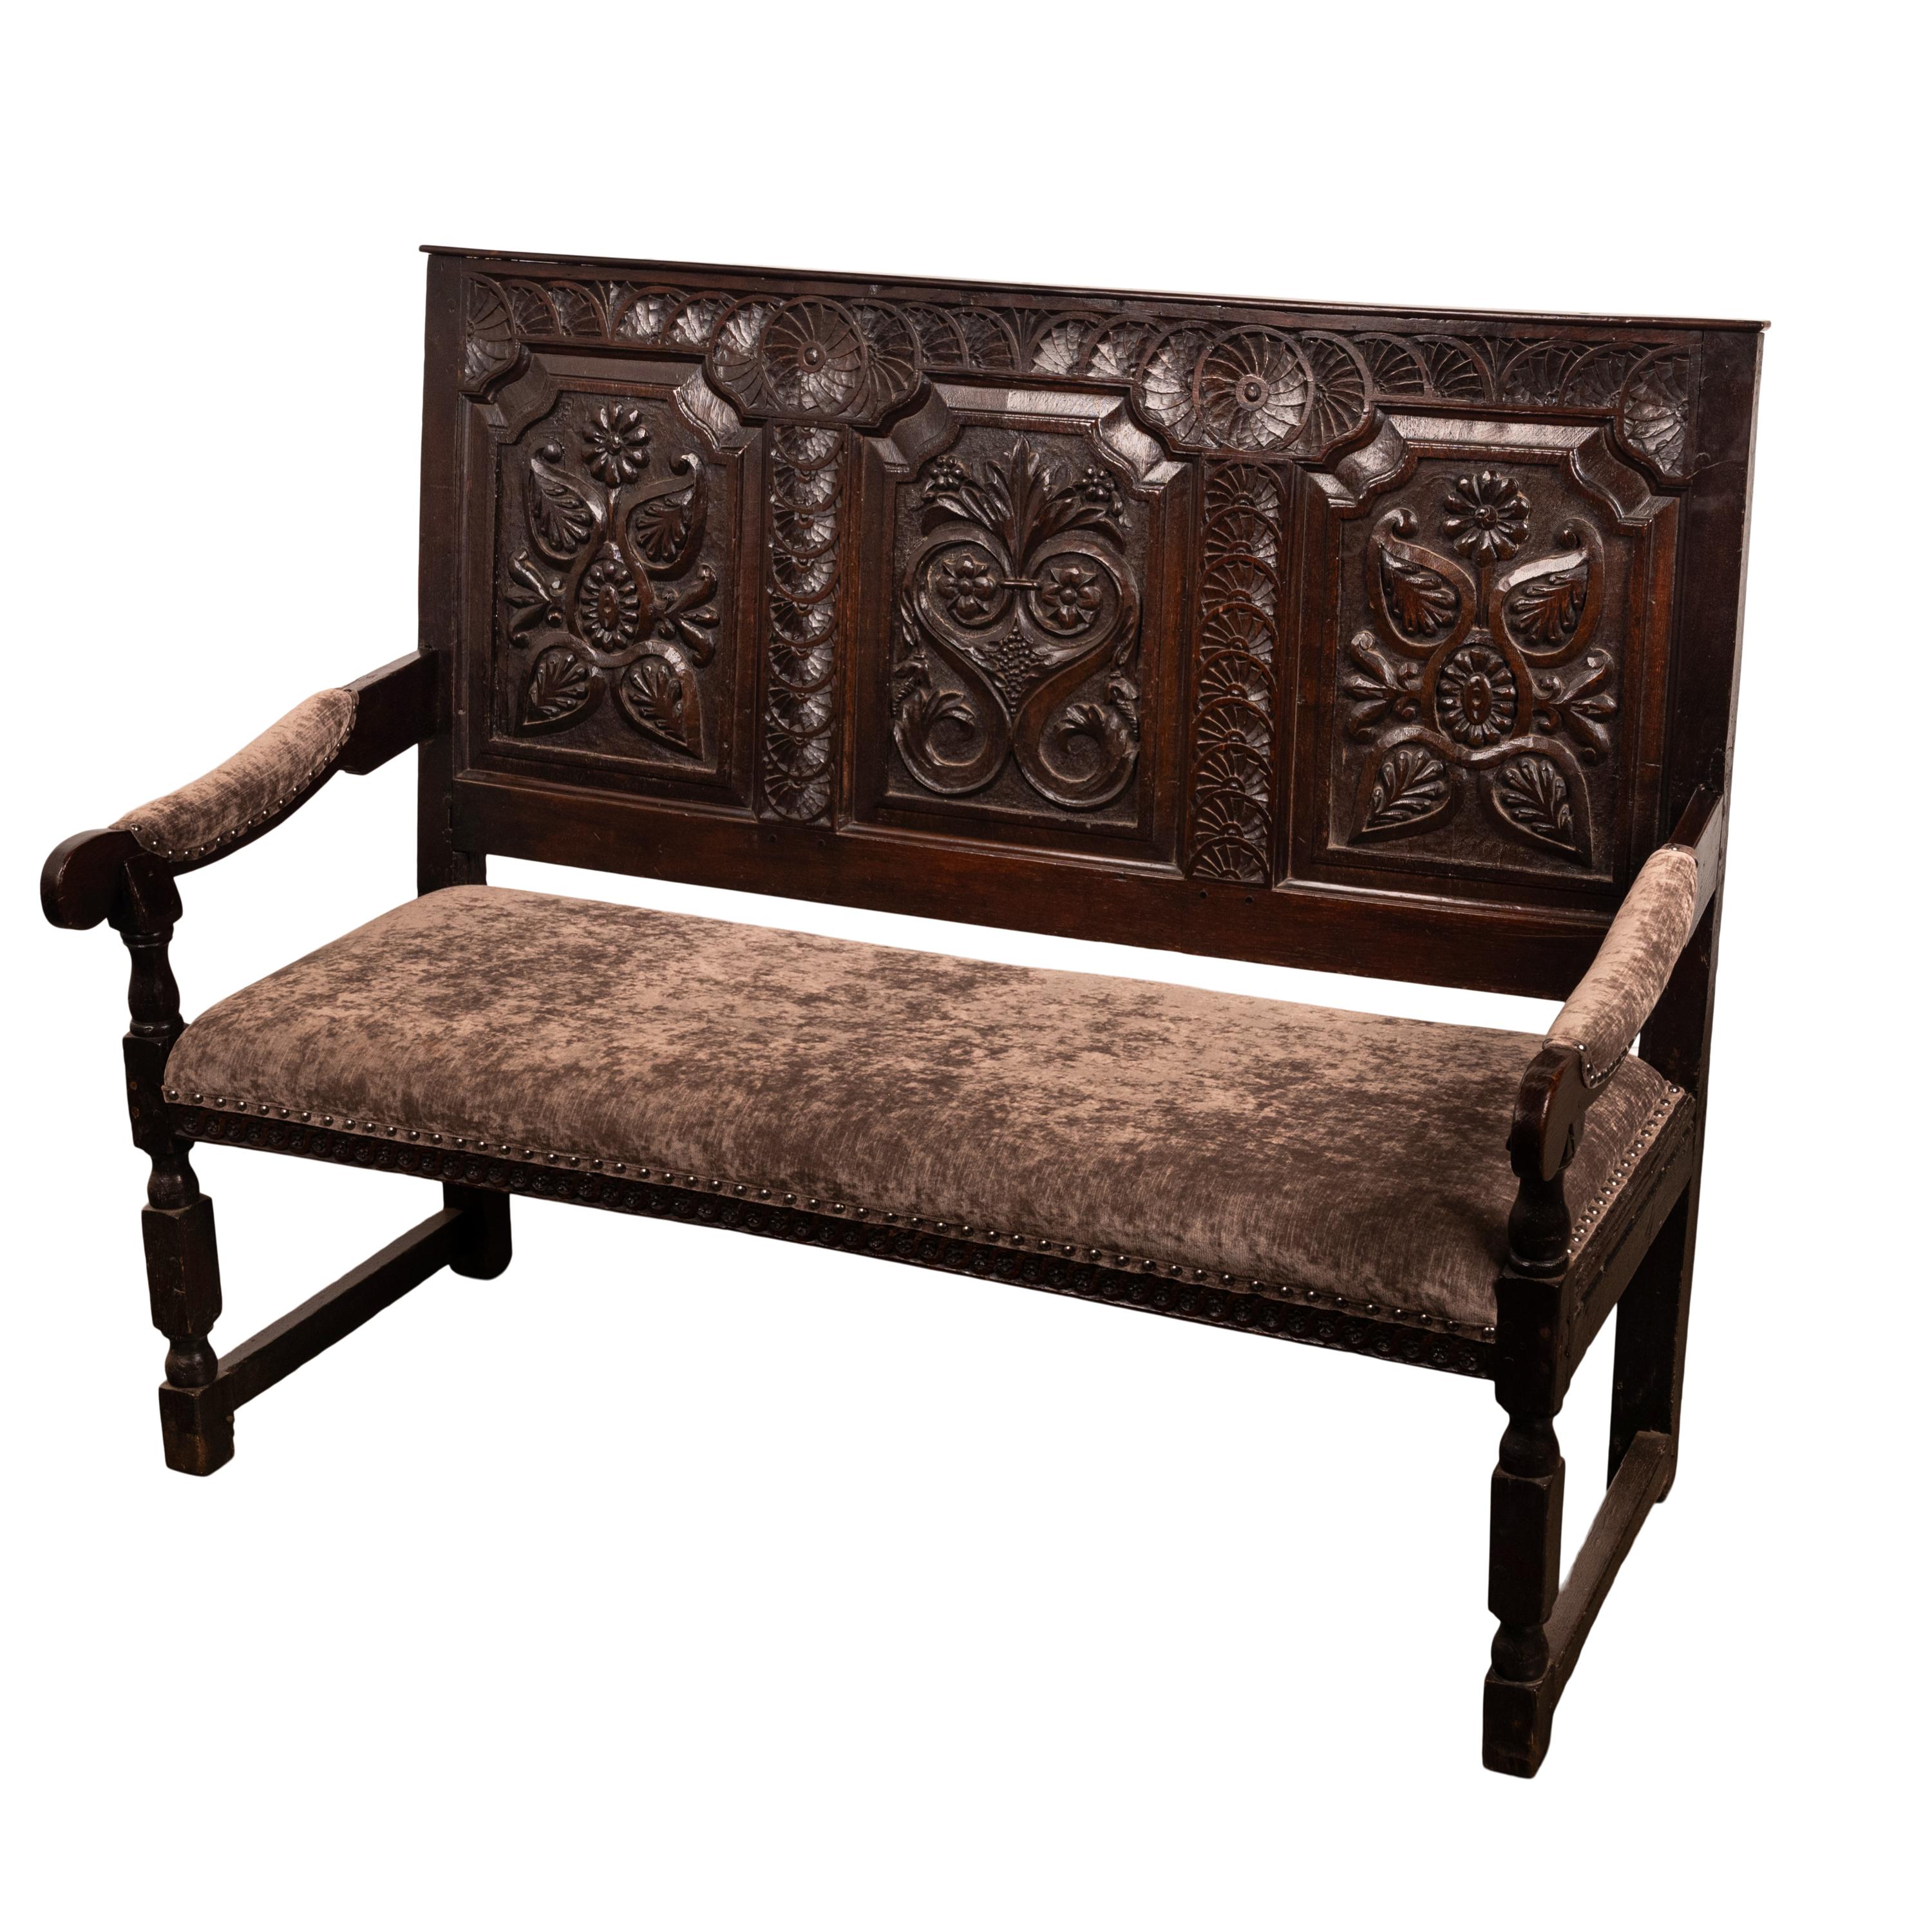 Antique English 17th Century King Charles II Carved Oak Settle Sofa Bench 1680 In Good Condition For Sale In Portland, OR